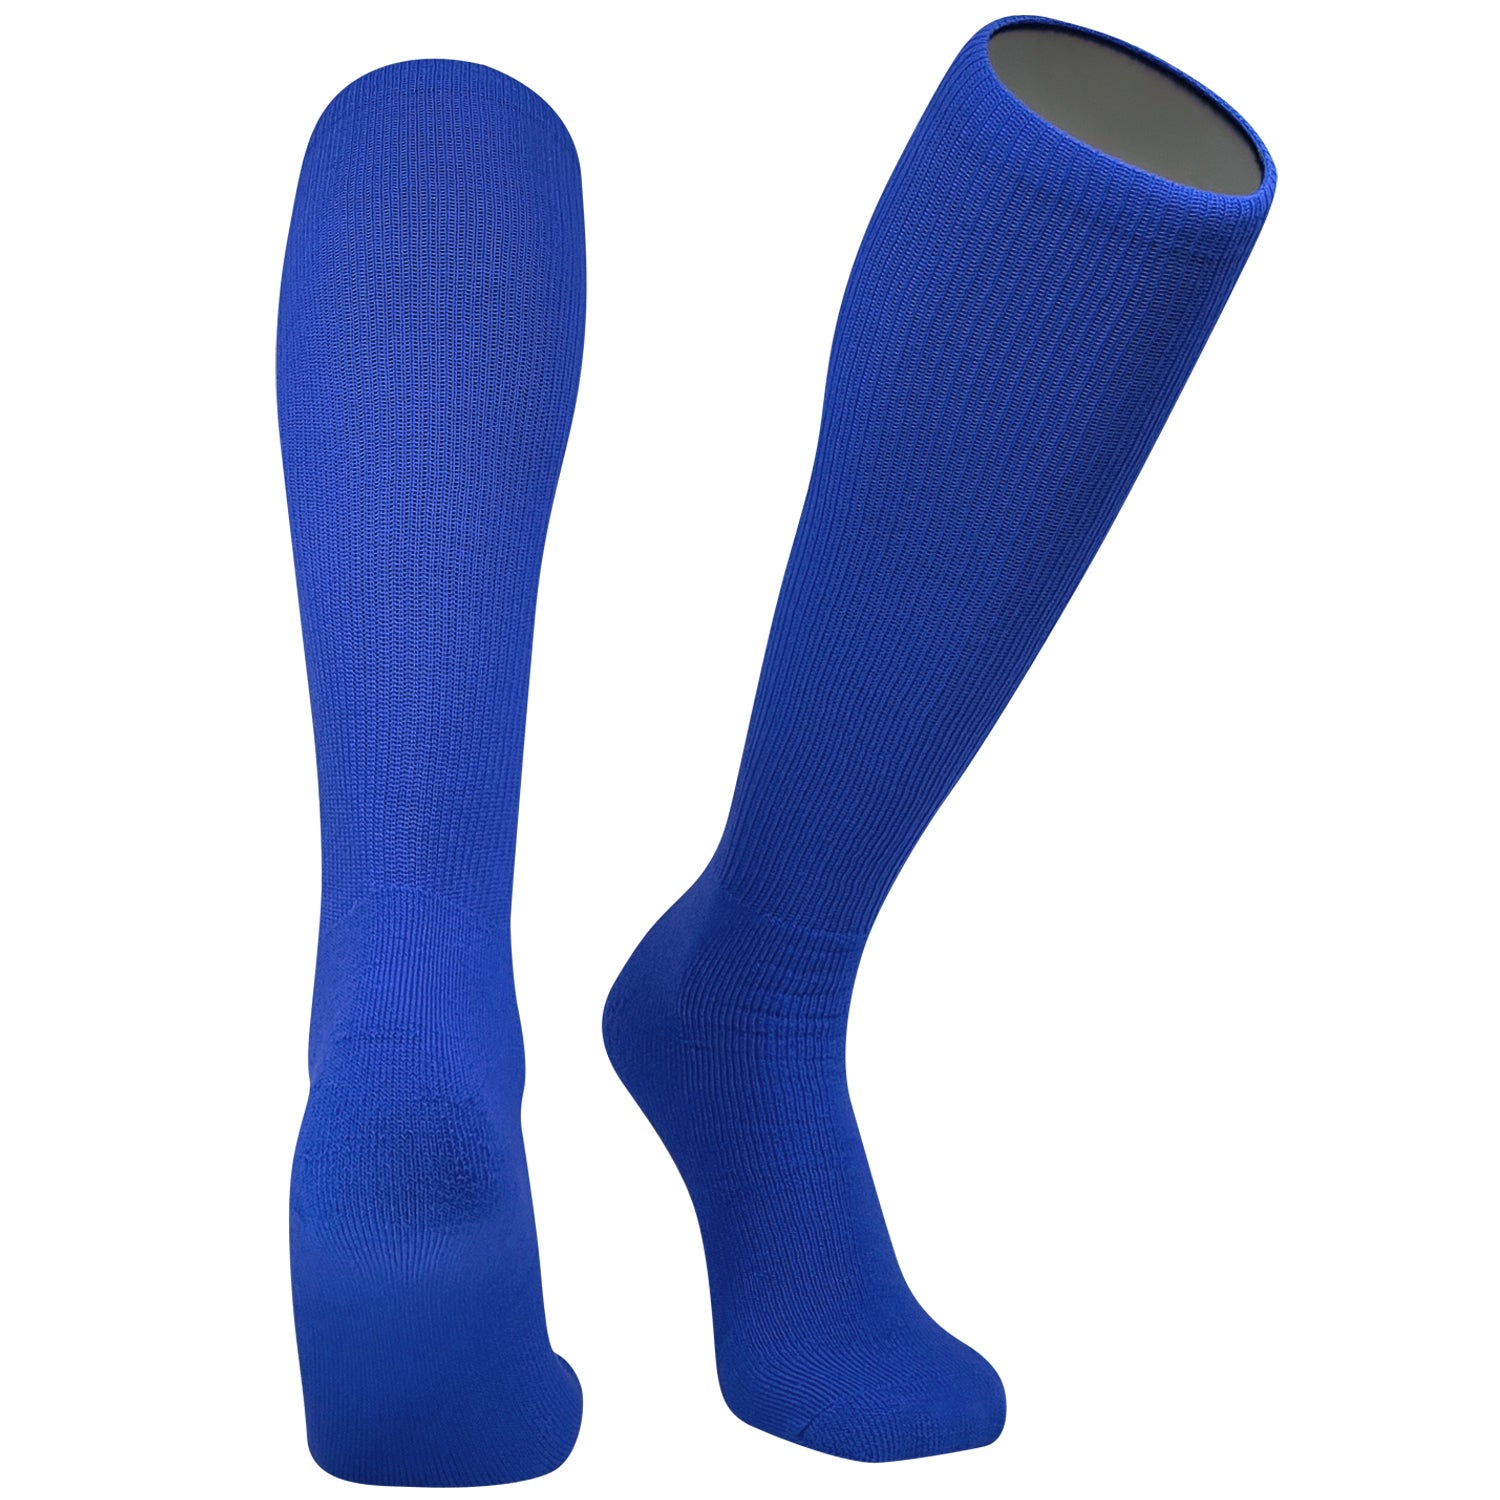 Sublimation Socks with Colored Foot Single Pair Adult Medium-Large (7-12) / Royal Blue